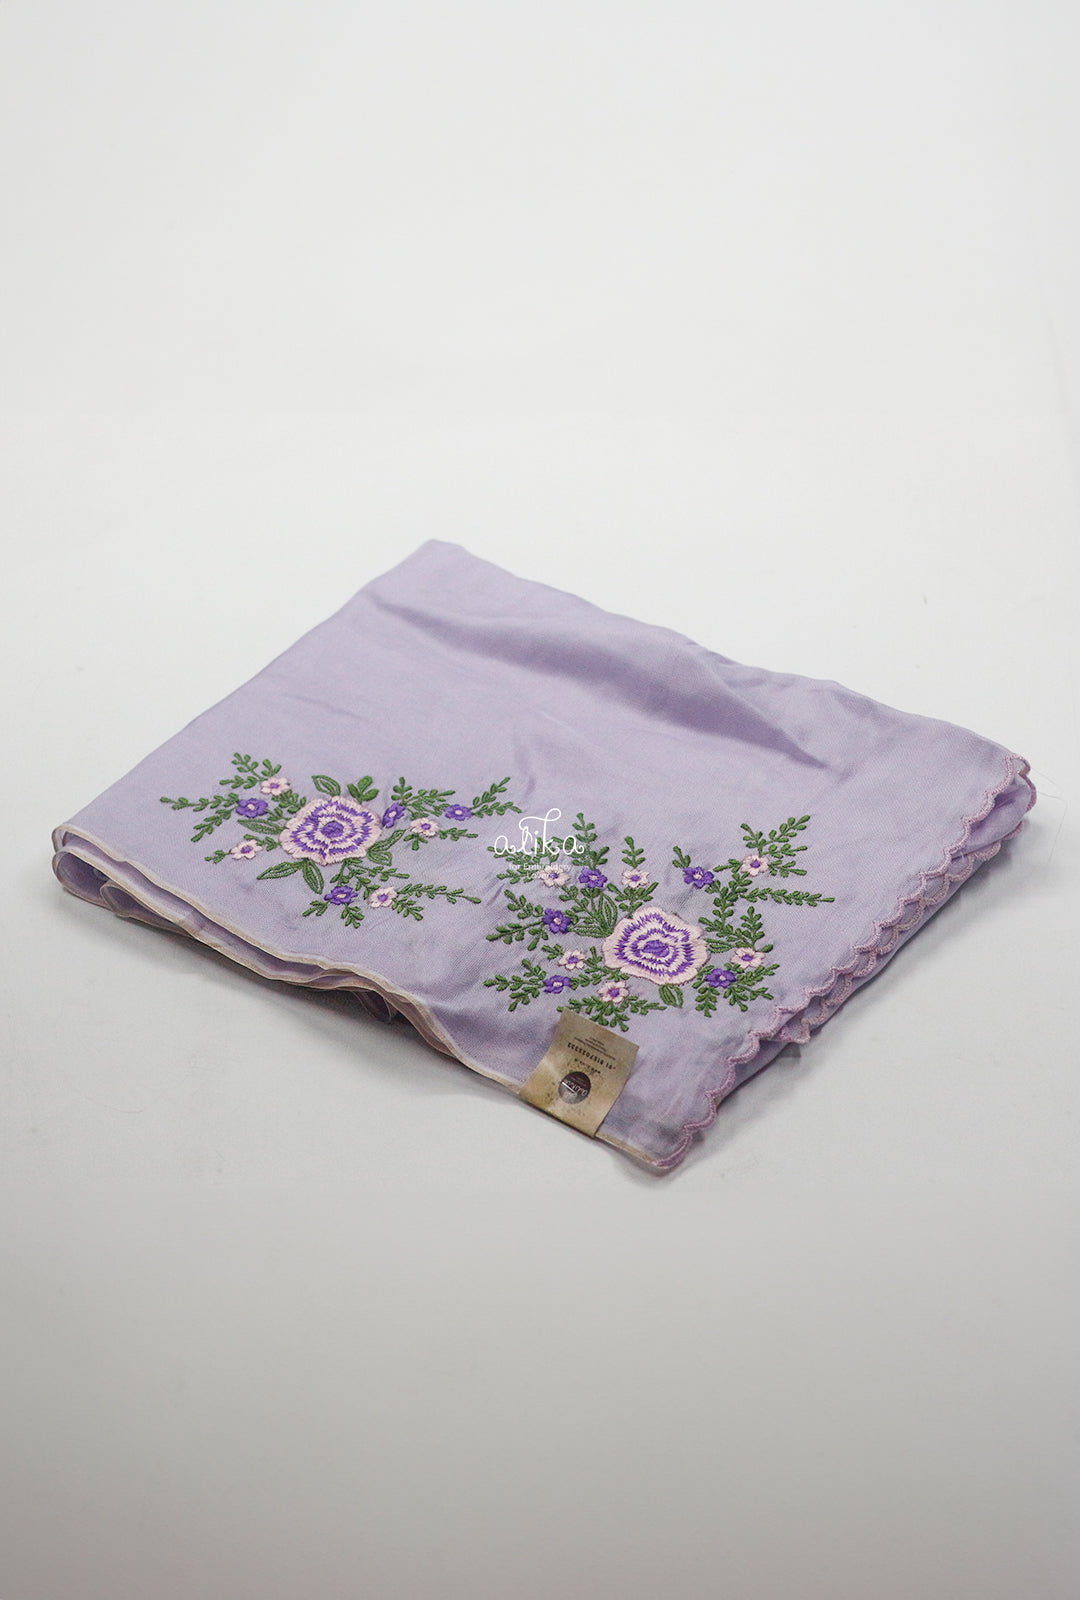 LAVENDER CRISPY GEORGETTE SAREE WITH BABY PINK AND VIOLET FLORAL MACHINE EMBROIDERY